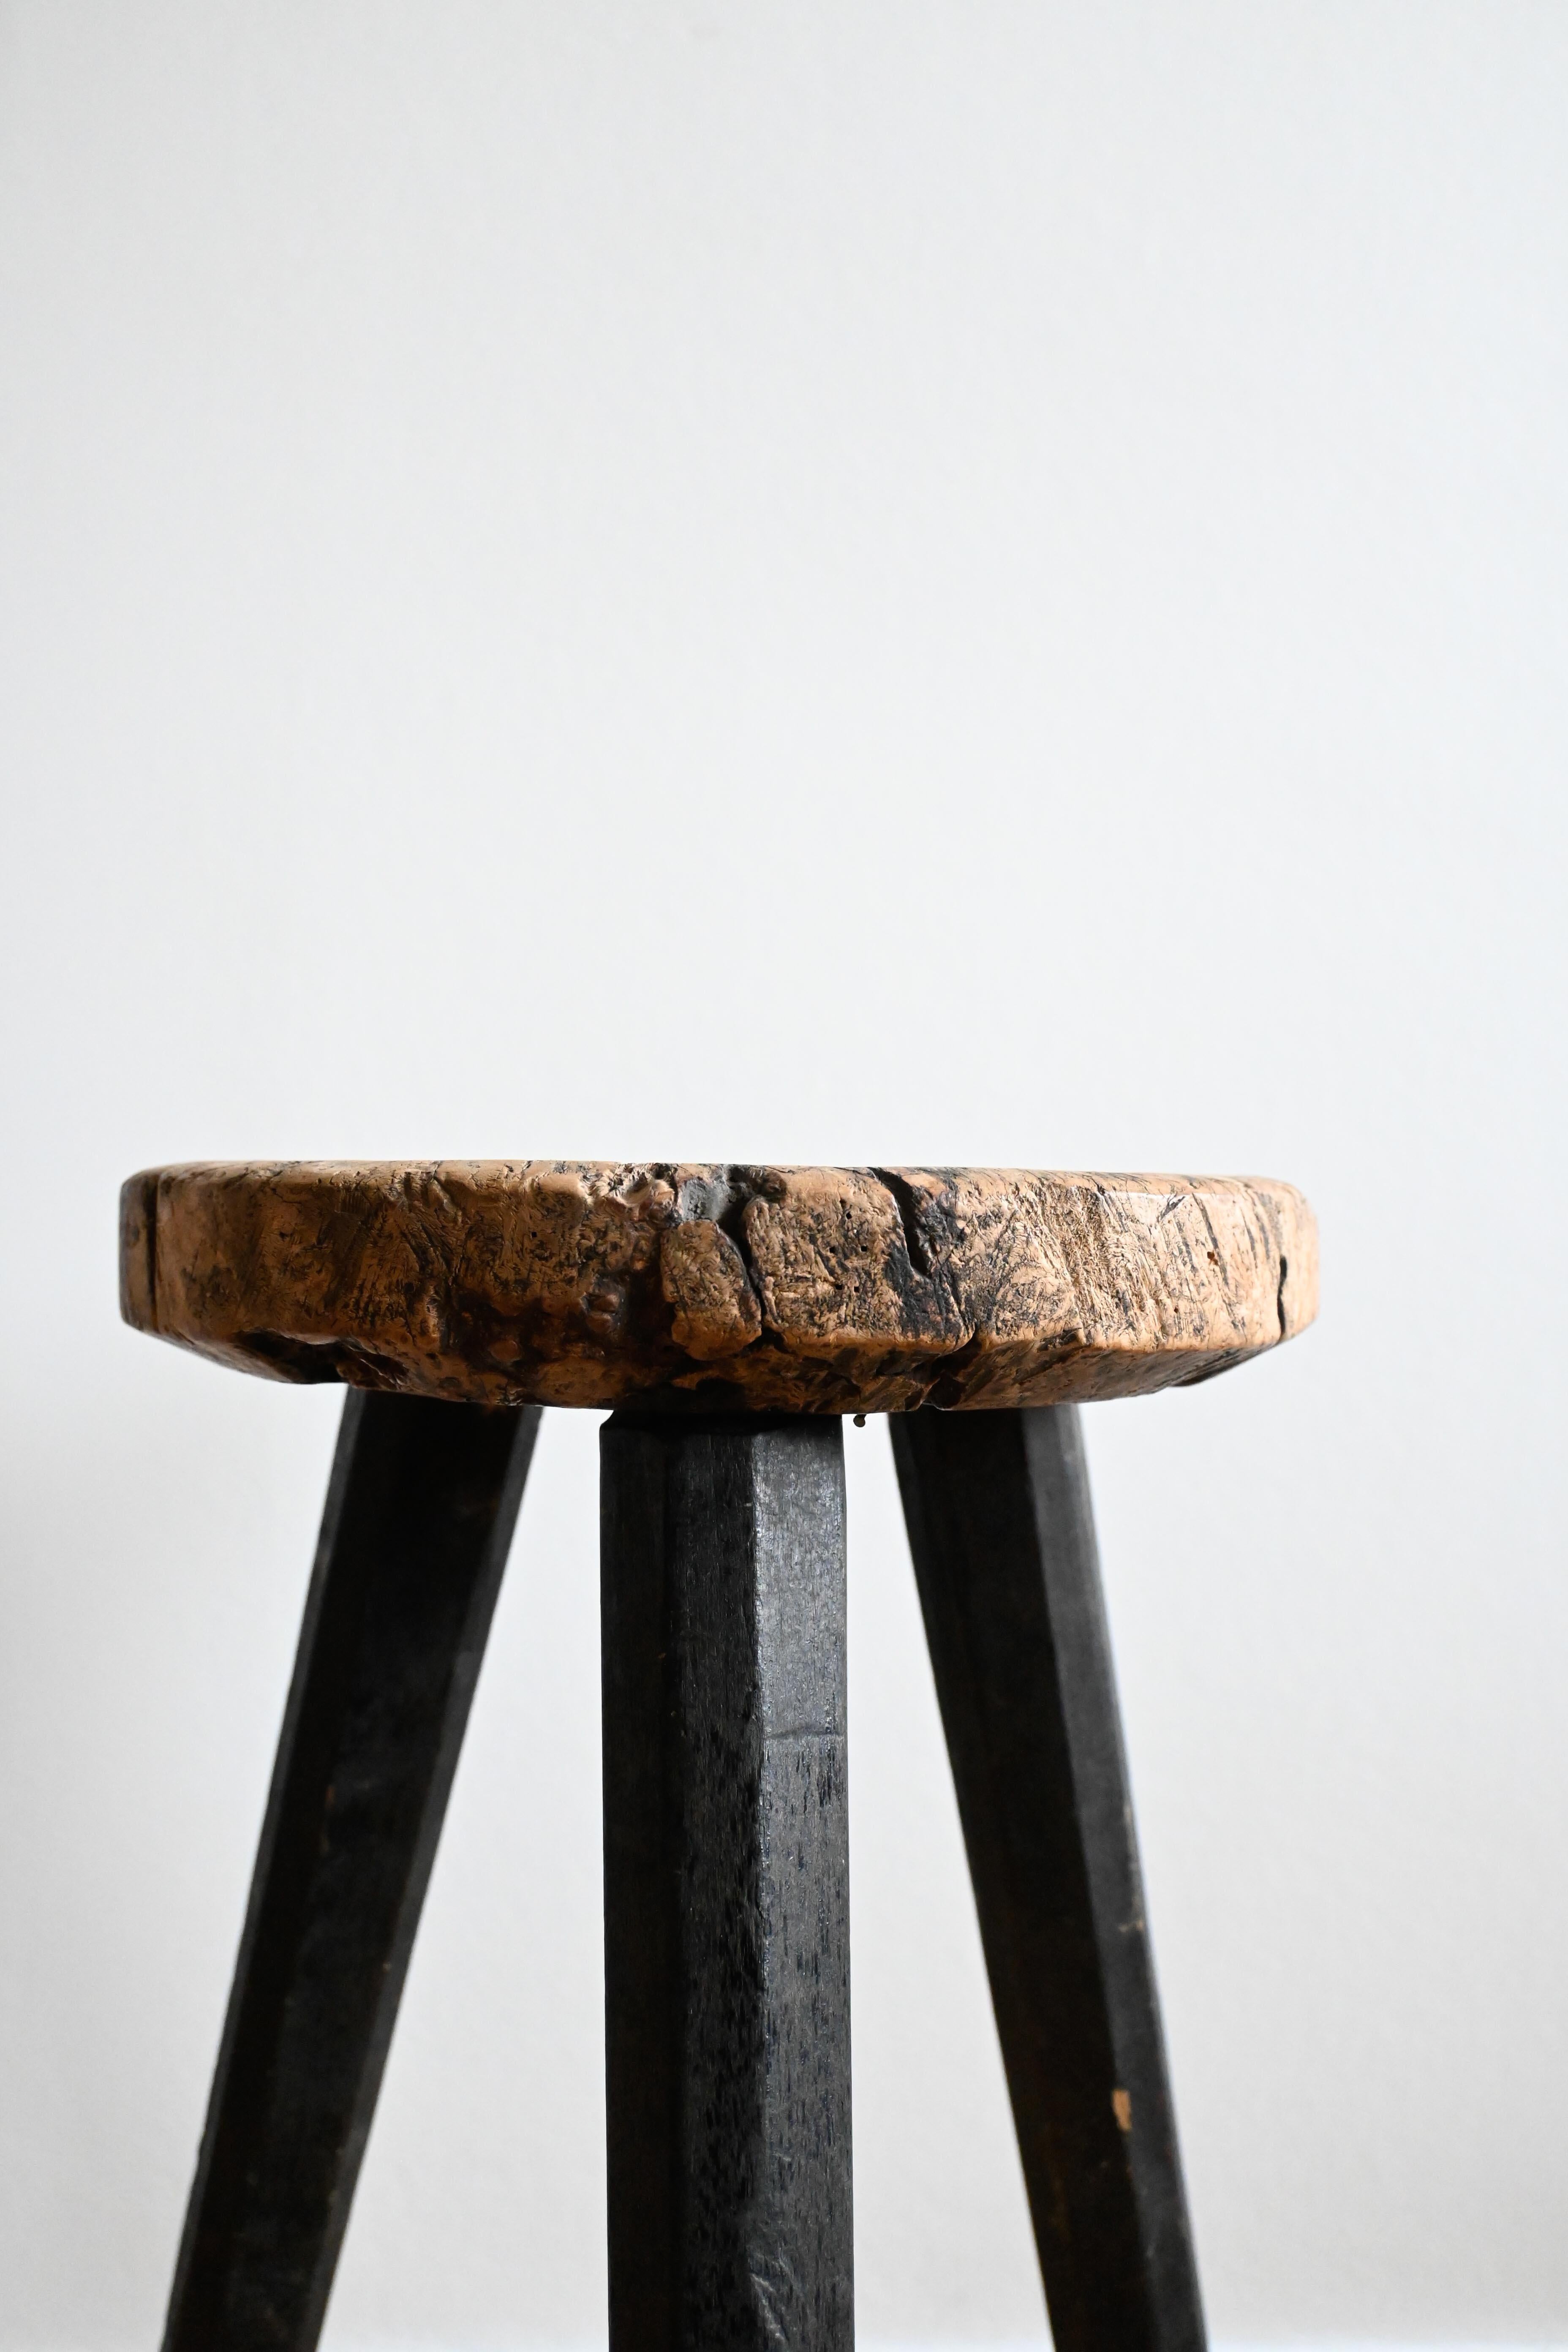 Three-legged Stool from 1798
Made of Birch Tree (Betula tortuosa) from Northen Sweden

Dated year 1798 and signed with owner's mark E.F.B

The stool's legs were crafted in the 20th century.

Height: 44 cm
Diameter: 26 cm

Someone has put a cork in